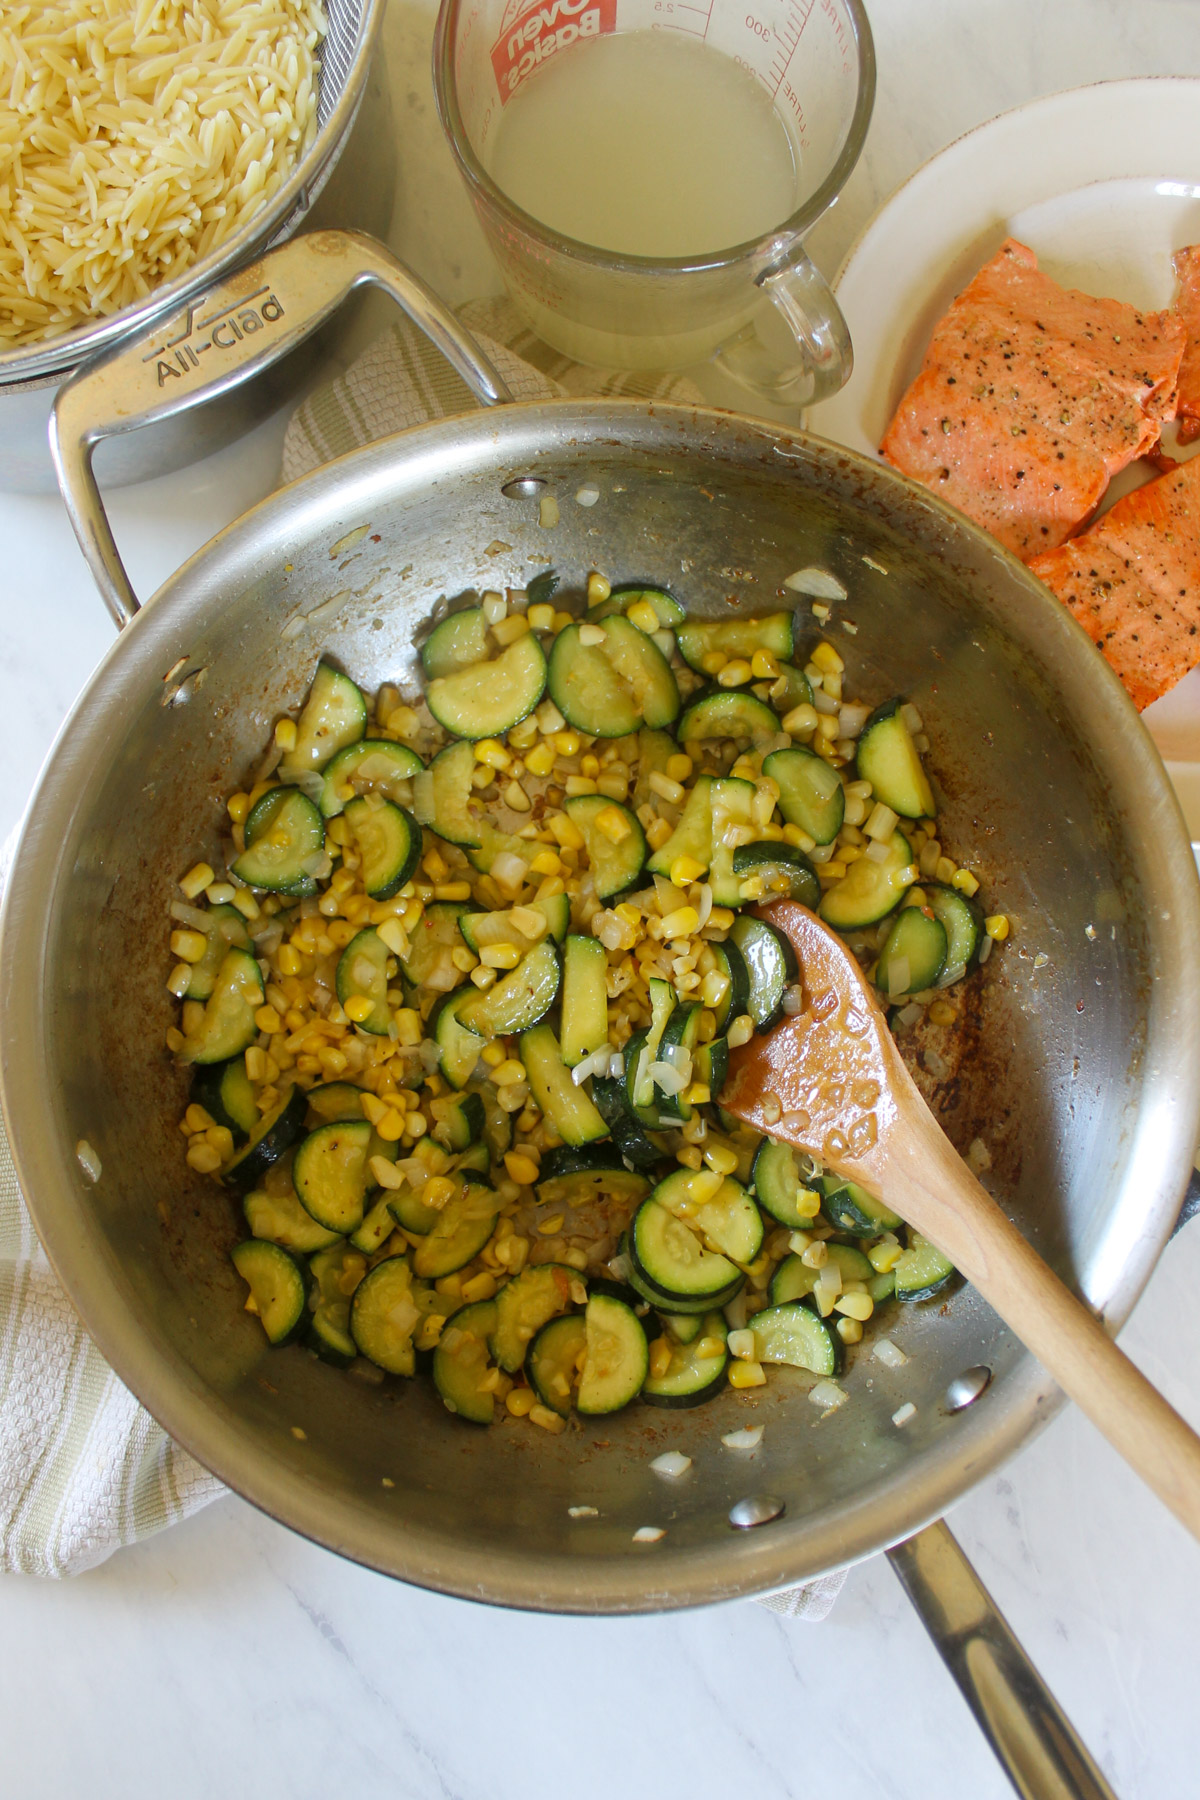 Sauteed zucchini and corn in a skillet next to a plate of cooked salmon filets.